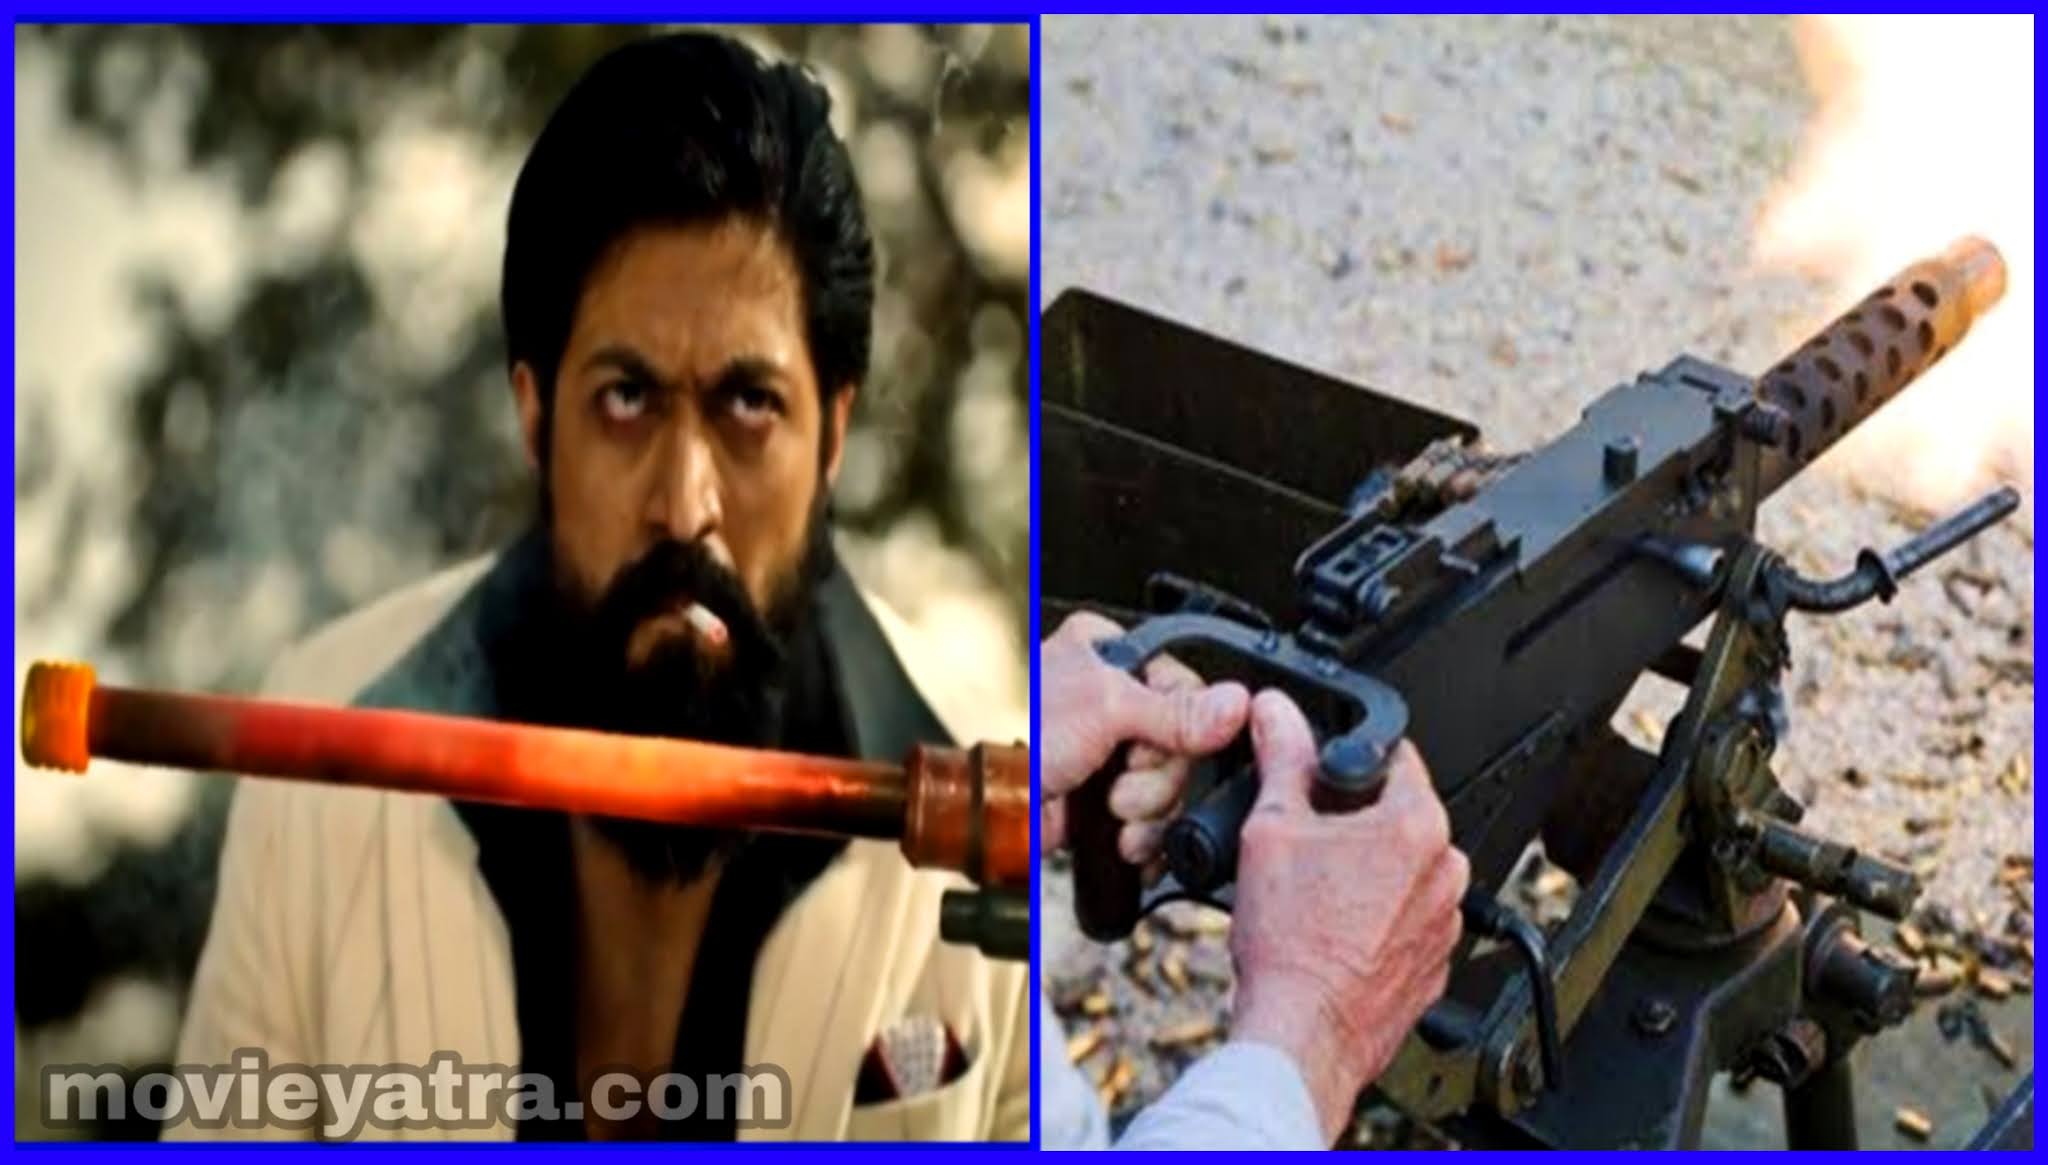 Which name of the Gun Whom used on kgf chapter 2 Teaser